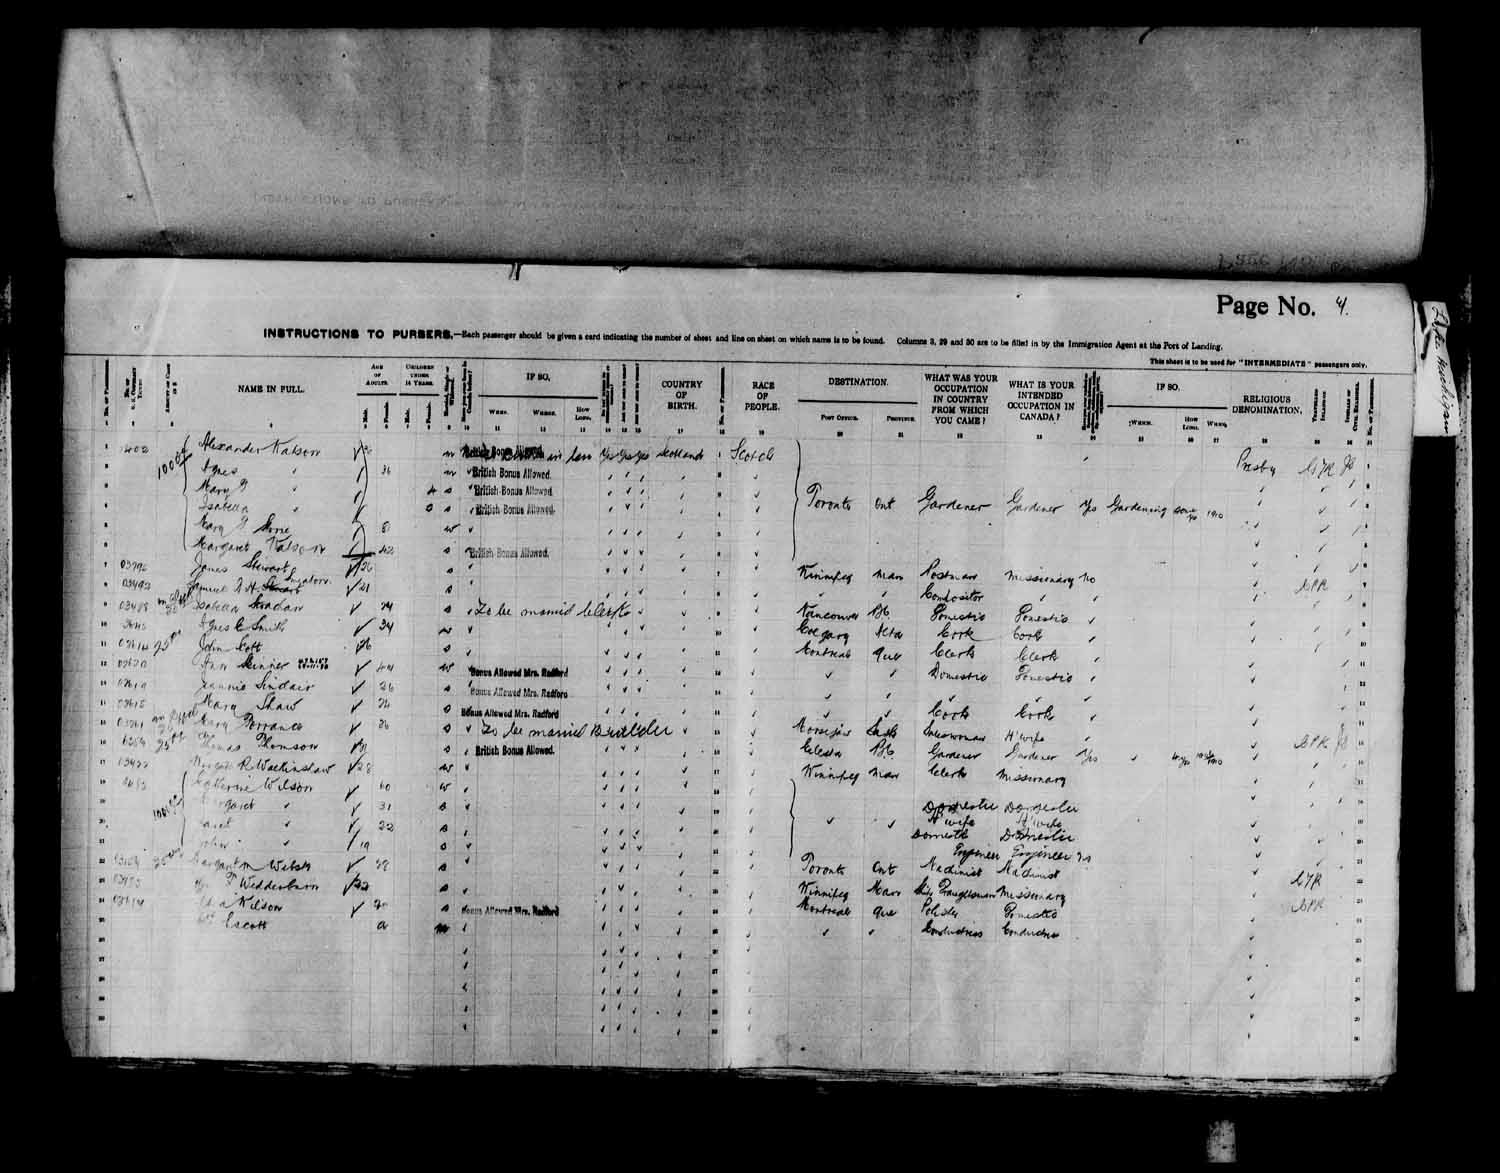 Digitized page of Passenger Lists for Image No.: e003566518